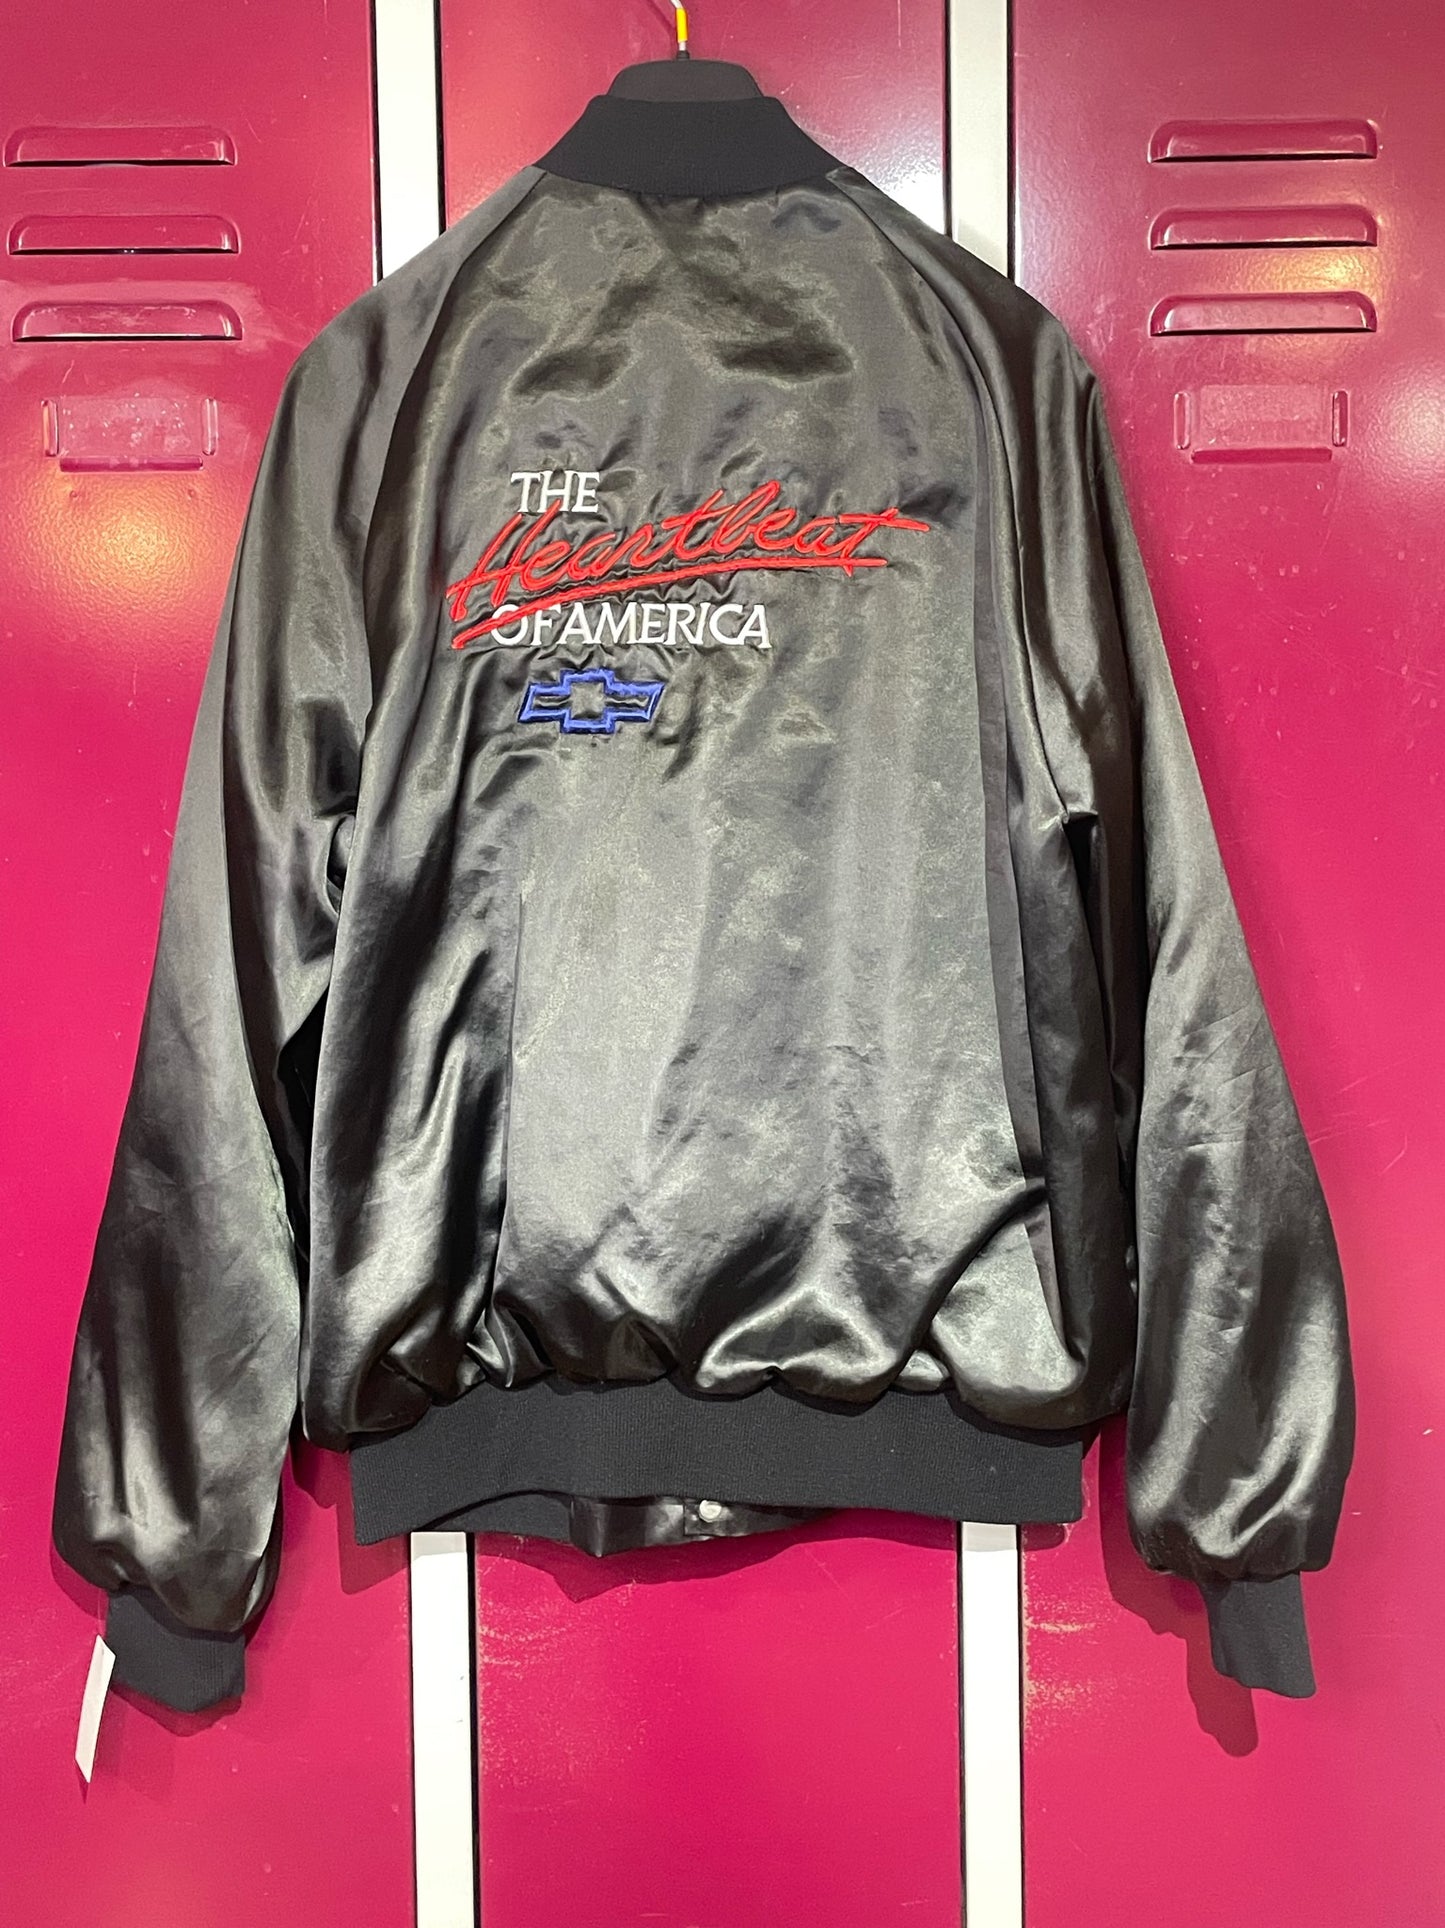 VINTAGE 80s CHEVROLET "THE HEARTBEAT OF AMERICA" MADE IN USA SATIN JACKET  SZ: L